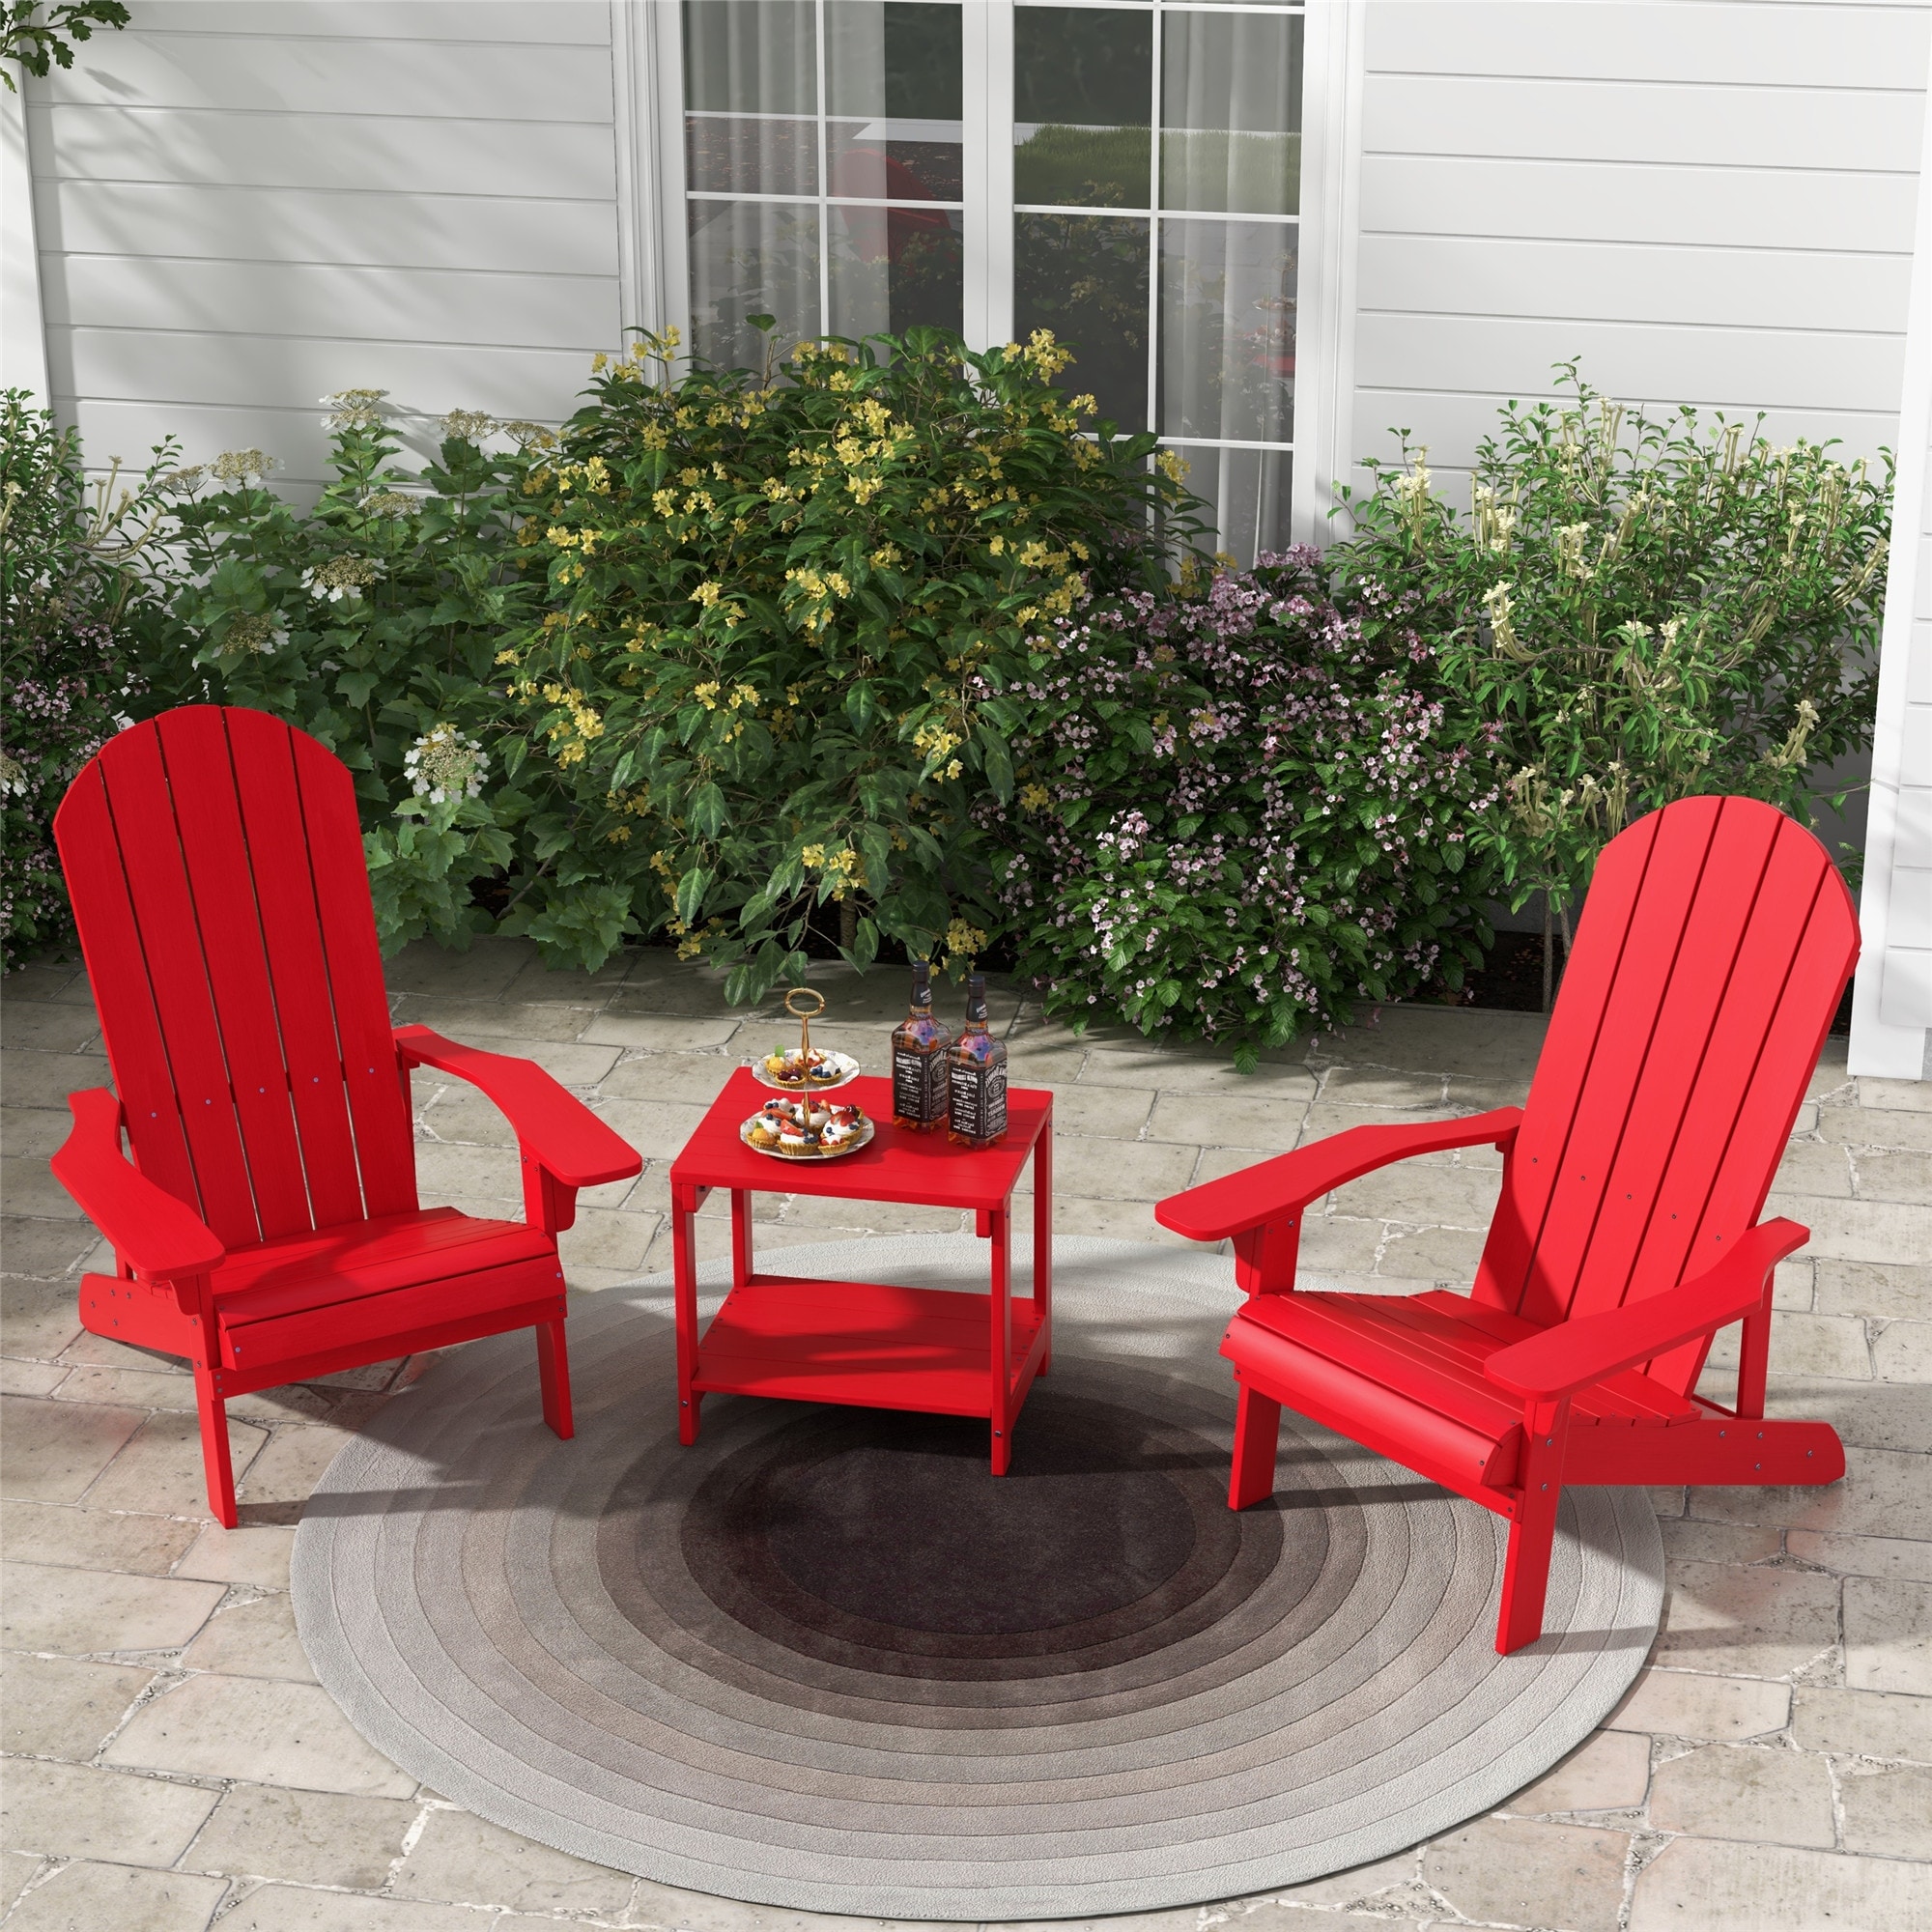 3 Pieces Garden Patio Furniture Set  All-weather Plastic Wood Bistro Set With 2 Chairs  Small Side End Table  For Balcony  Pool